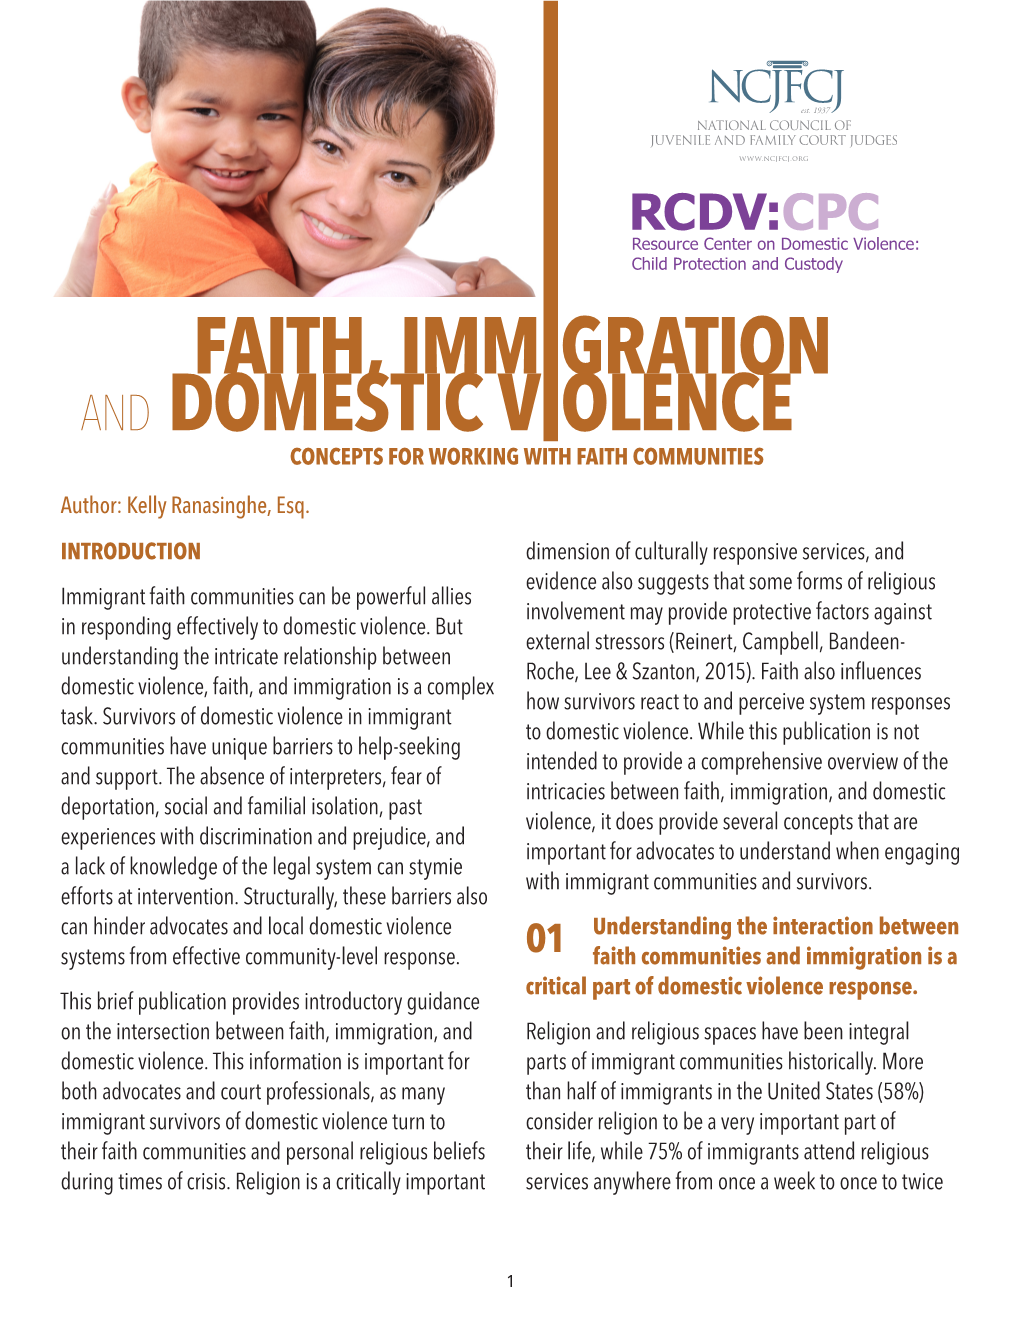 Faith, Immigration and Domestic Violence Concepts for Working with Faith Communities